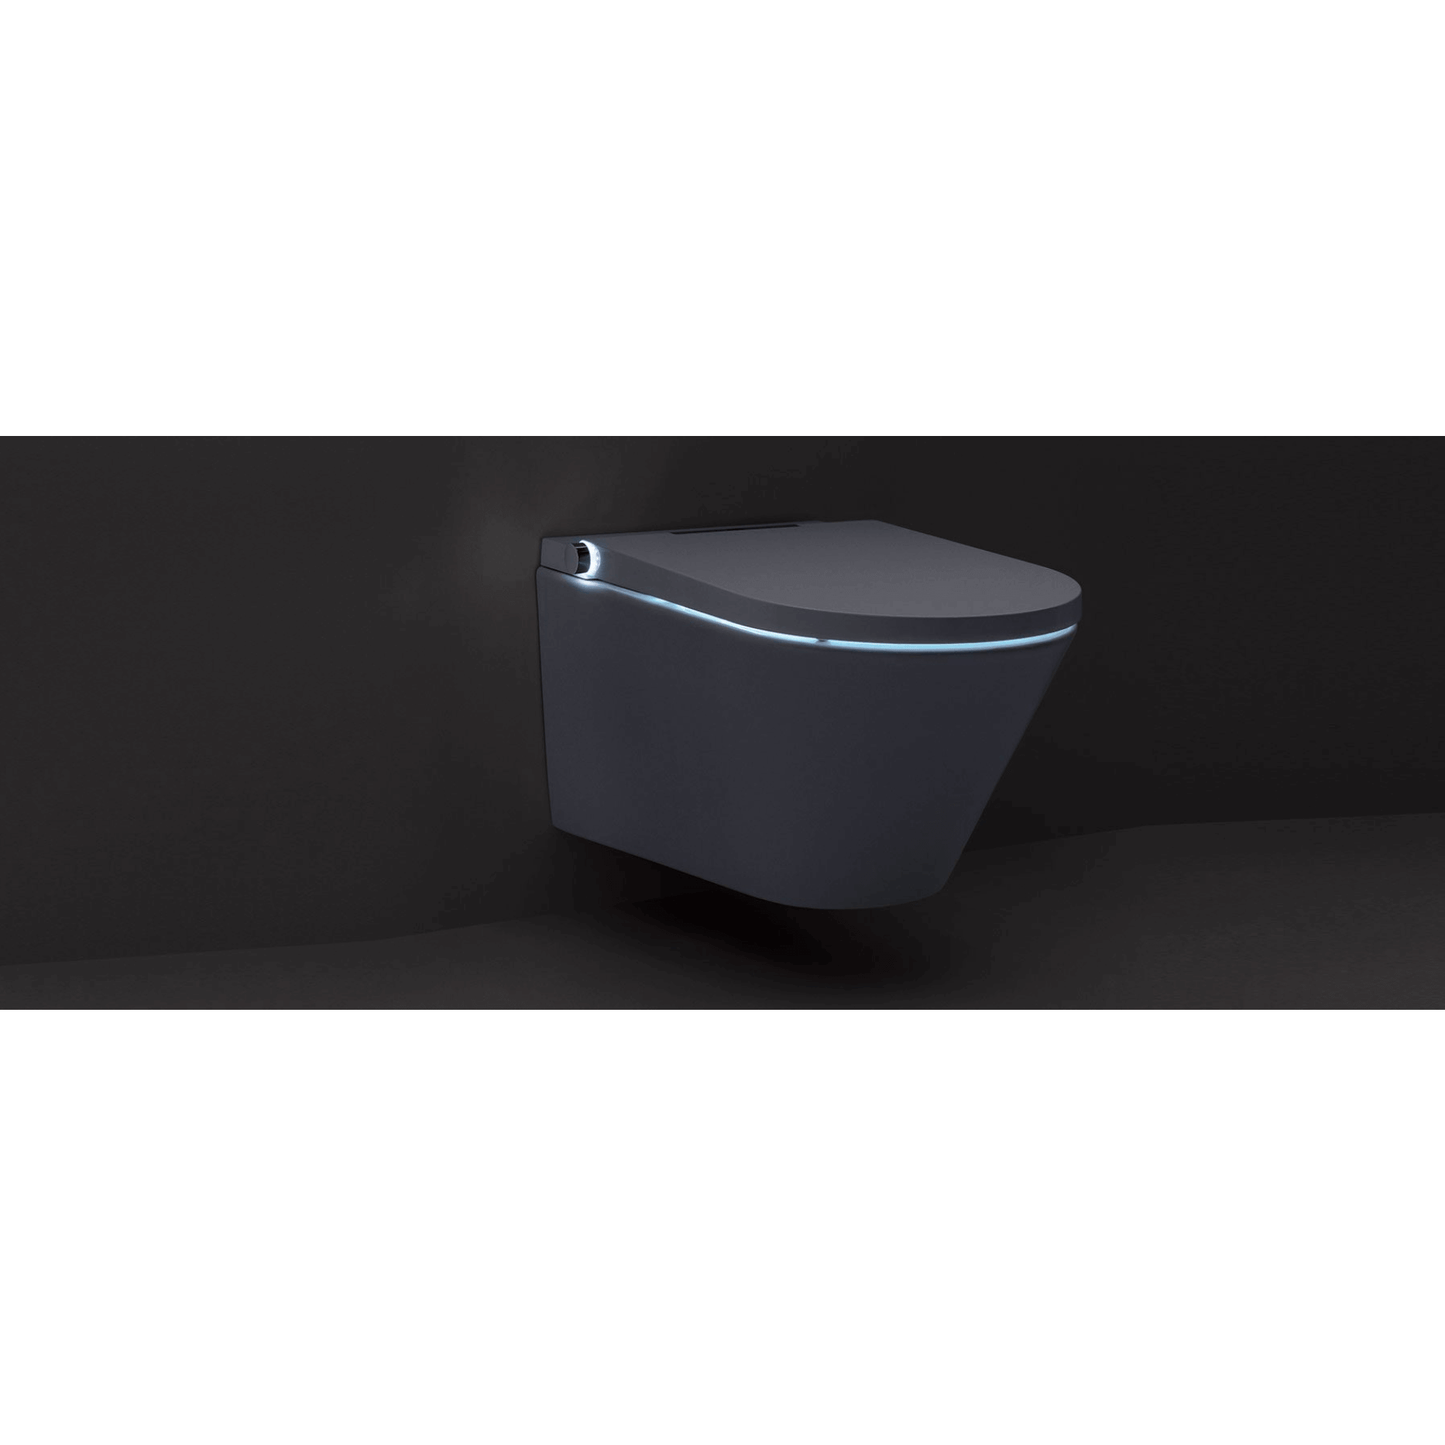 AXENT One Plus Wall Hung Intelligent Toilet - view of night light in darkness